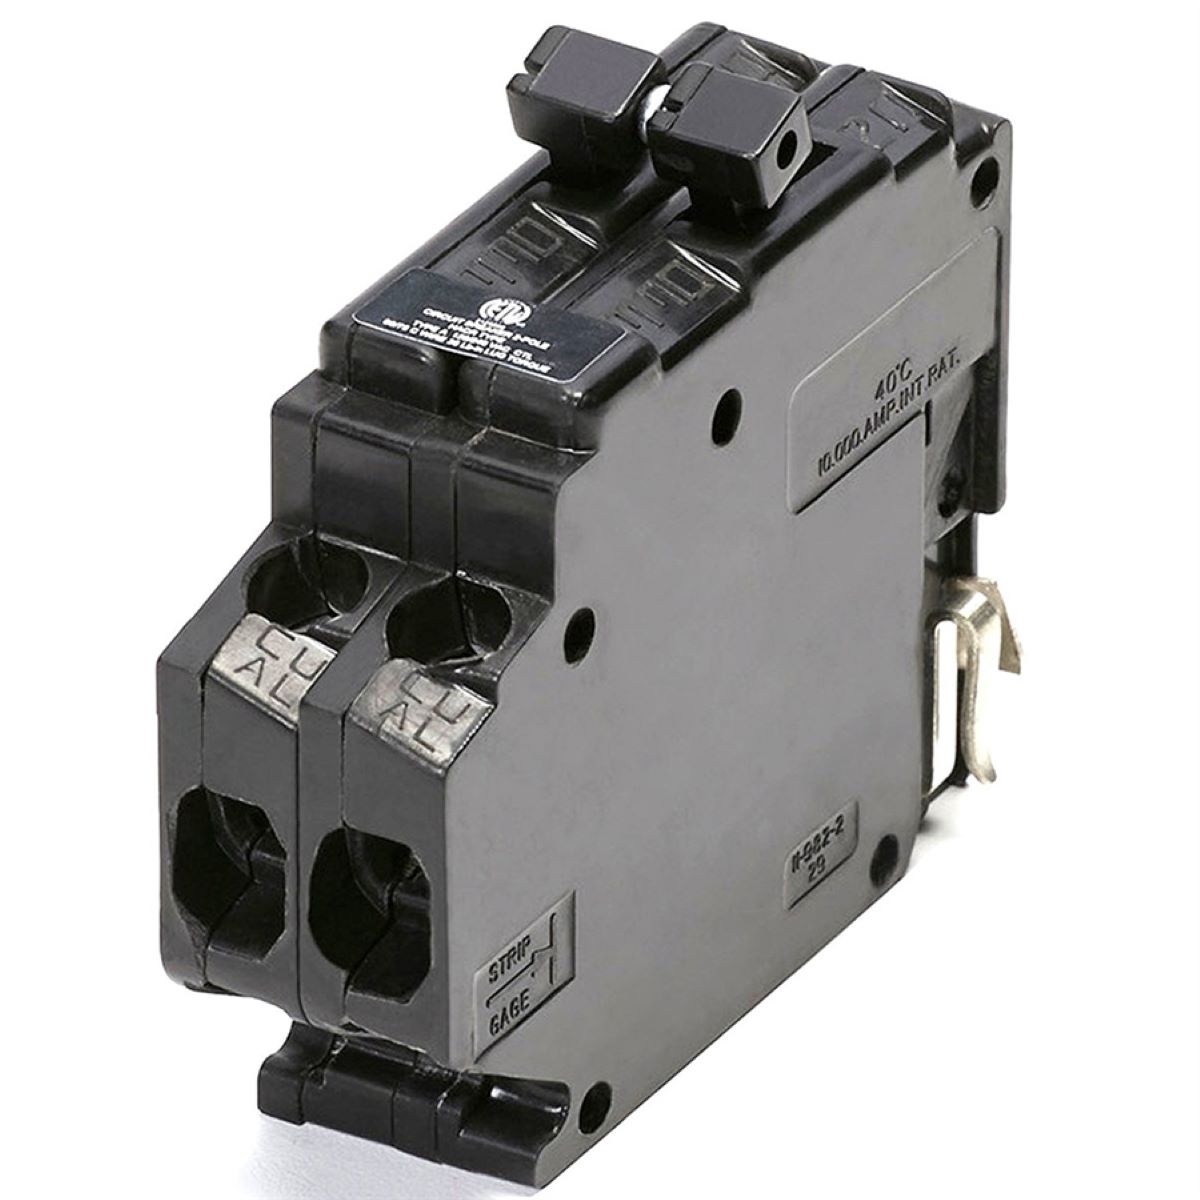 What Breakers Are Compatible With Crouse-Hinds